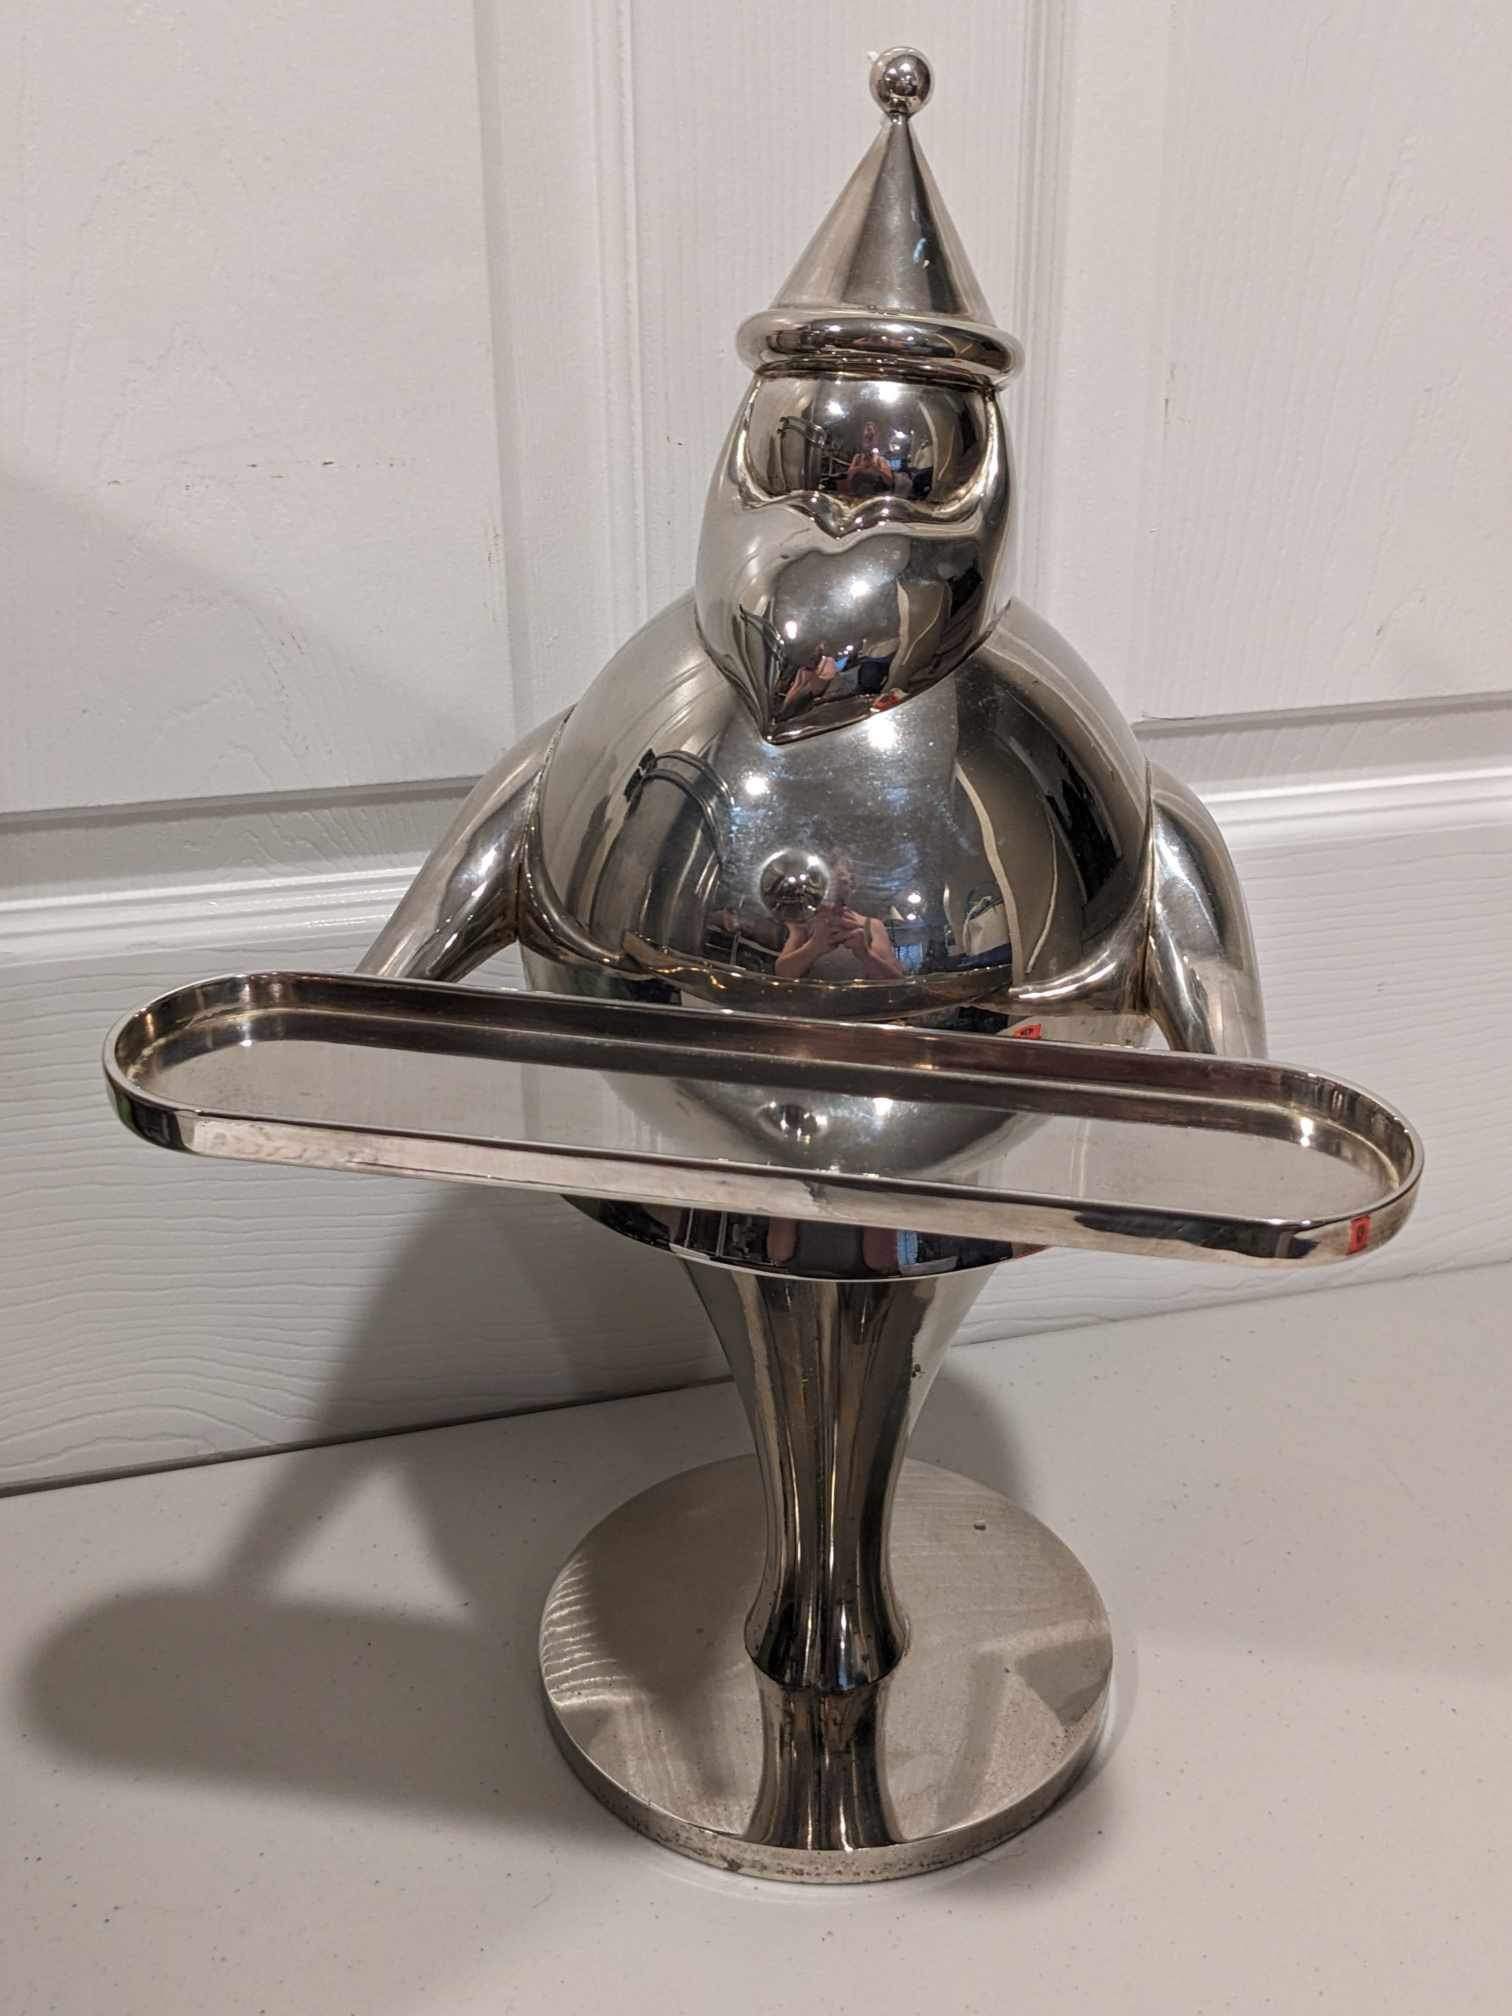 Beautiful XL Pottery Barn Santa Baby Silver Art Deco Style Vintage Christmas Collectible Candle Holder!!